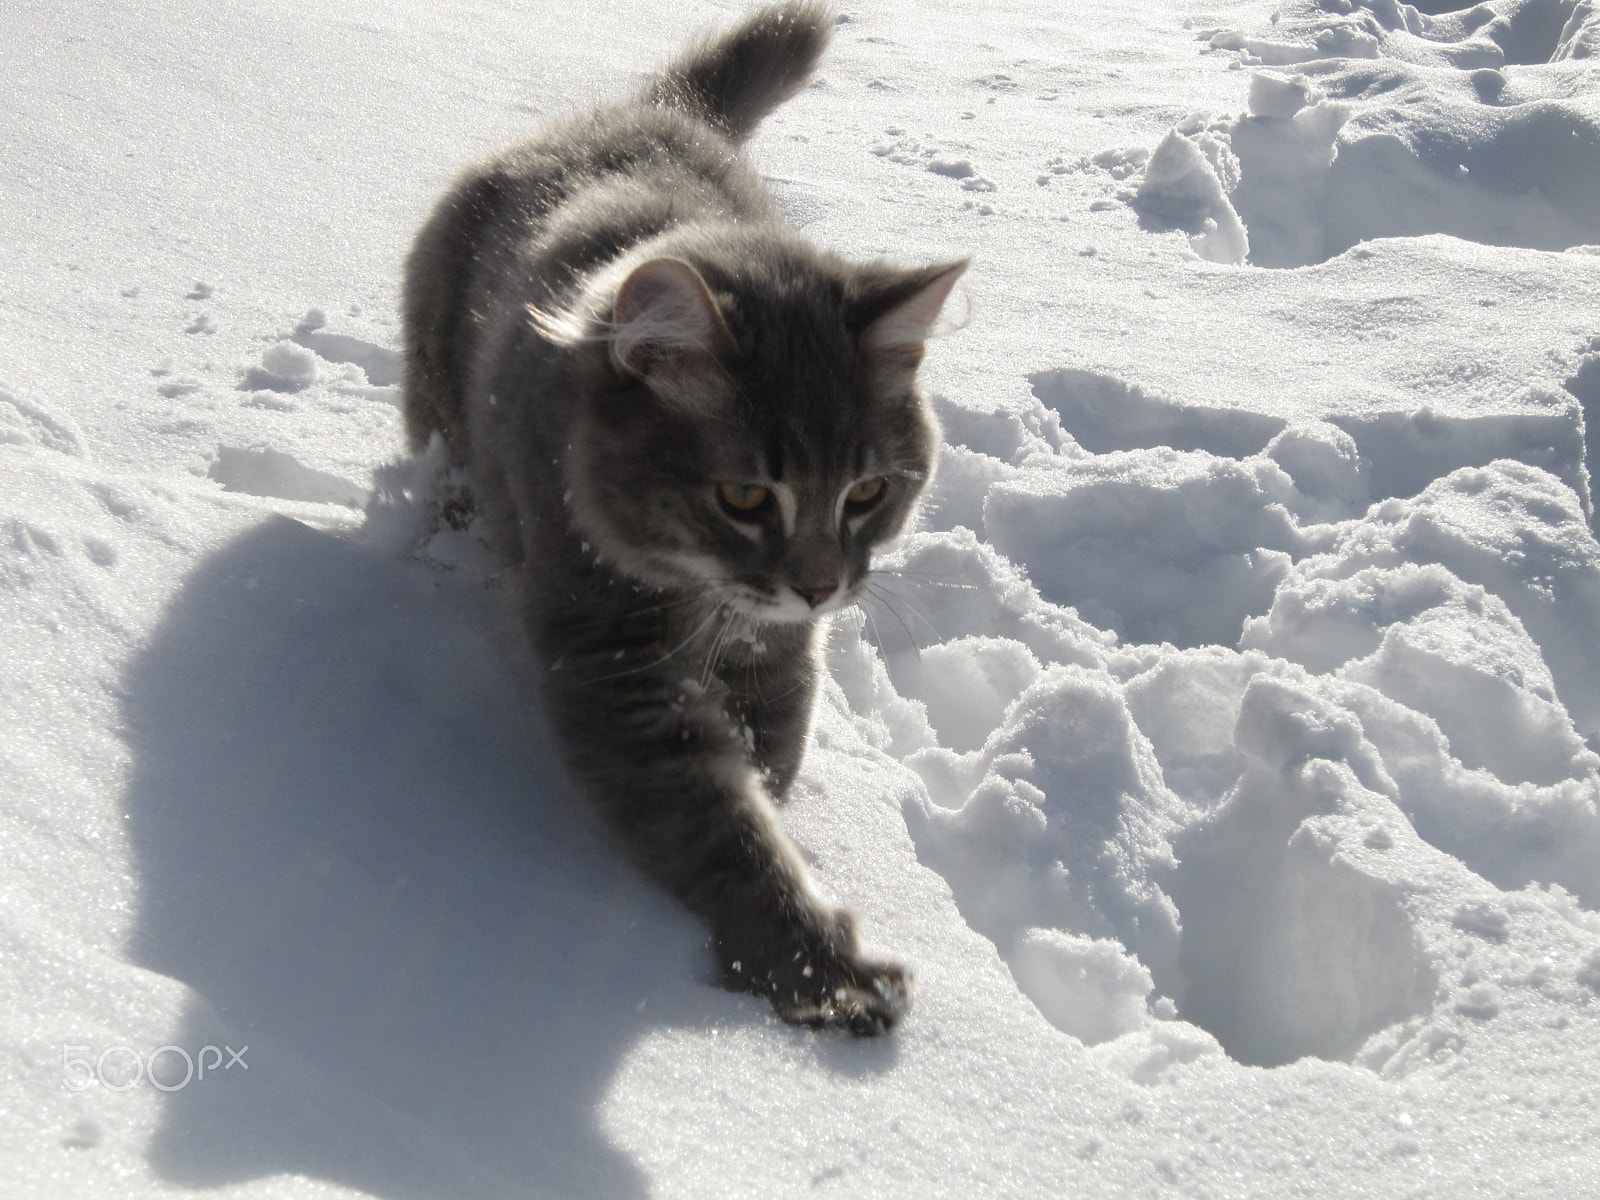 Canon PowerShot SD980 IS (Digital IXUS 200 IS / IXY Digital 930 IS) sample photo. Kitty in snow photography